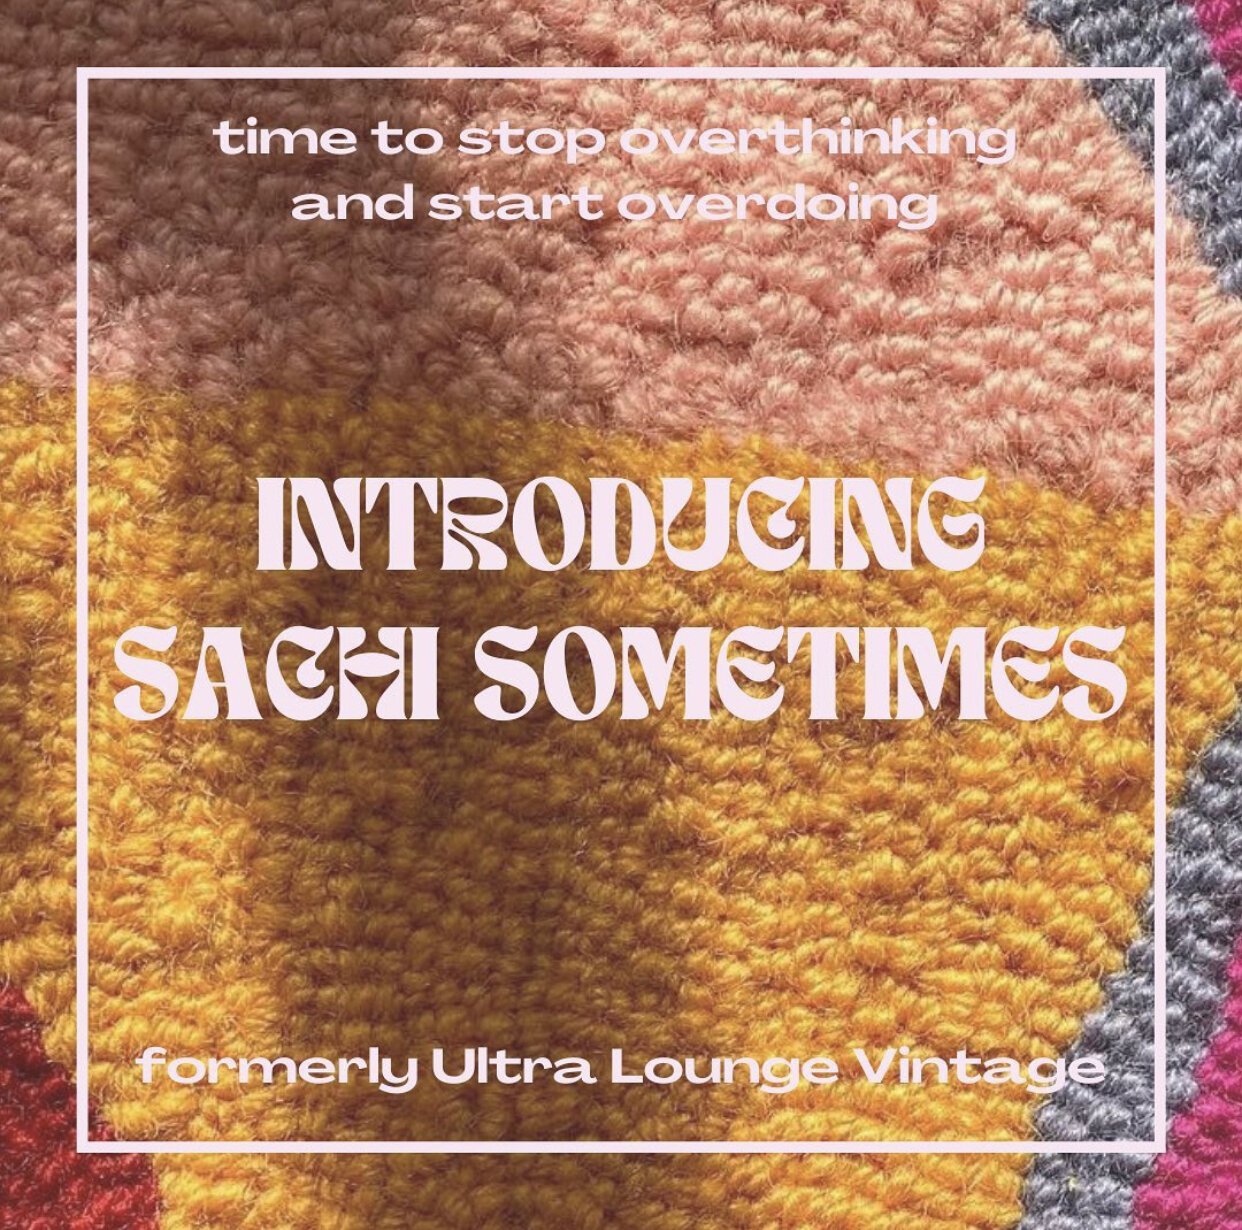 Sachiko Janek recently renamed her business, formerly known as Ultra Lounge, to "Sachi Sometimes".